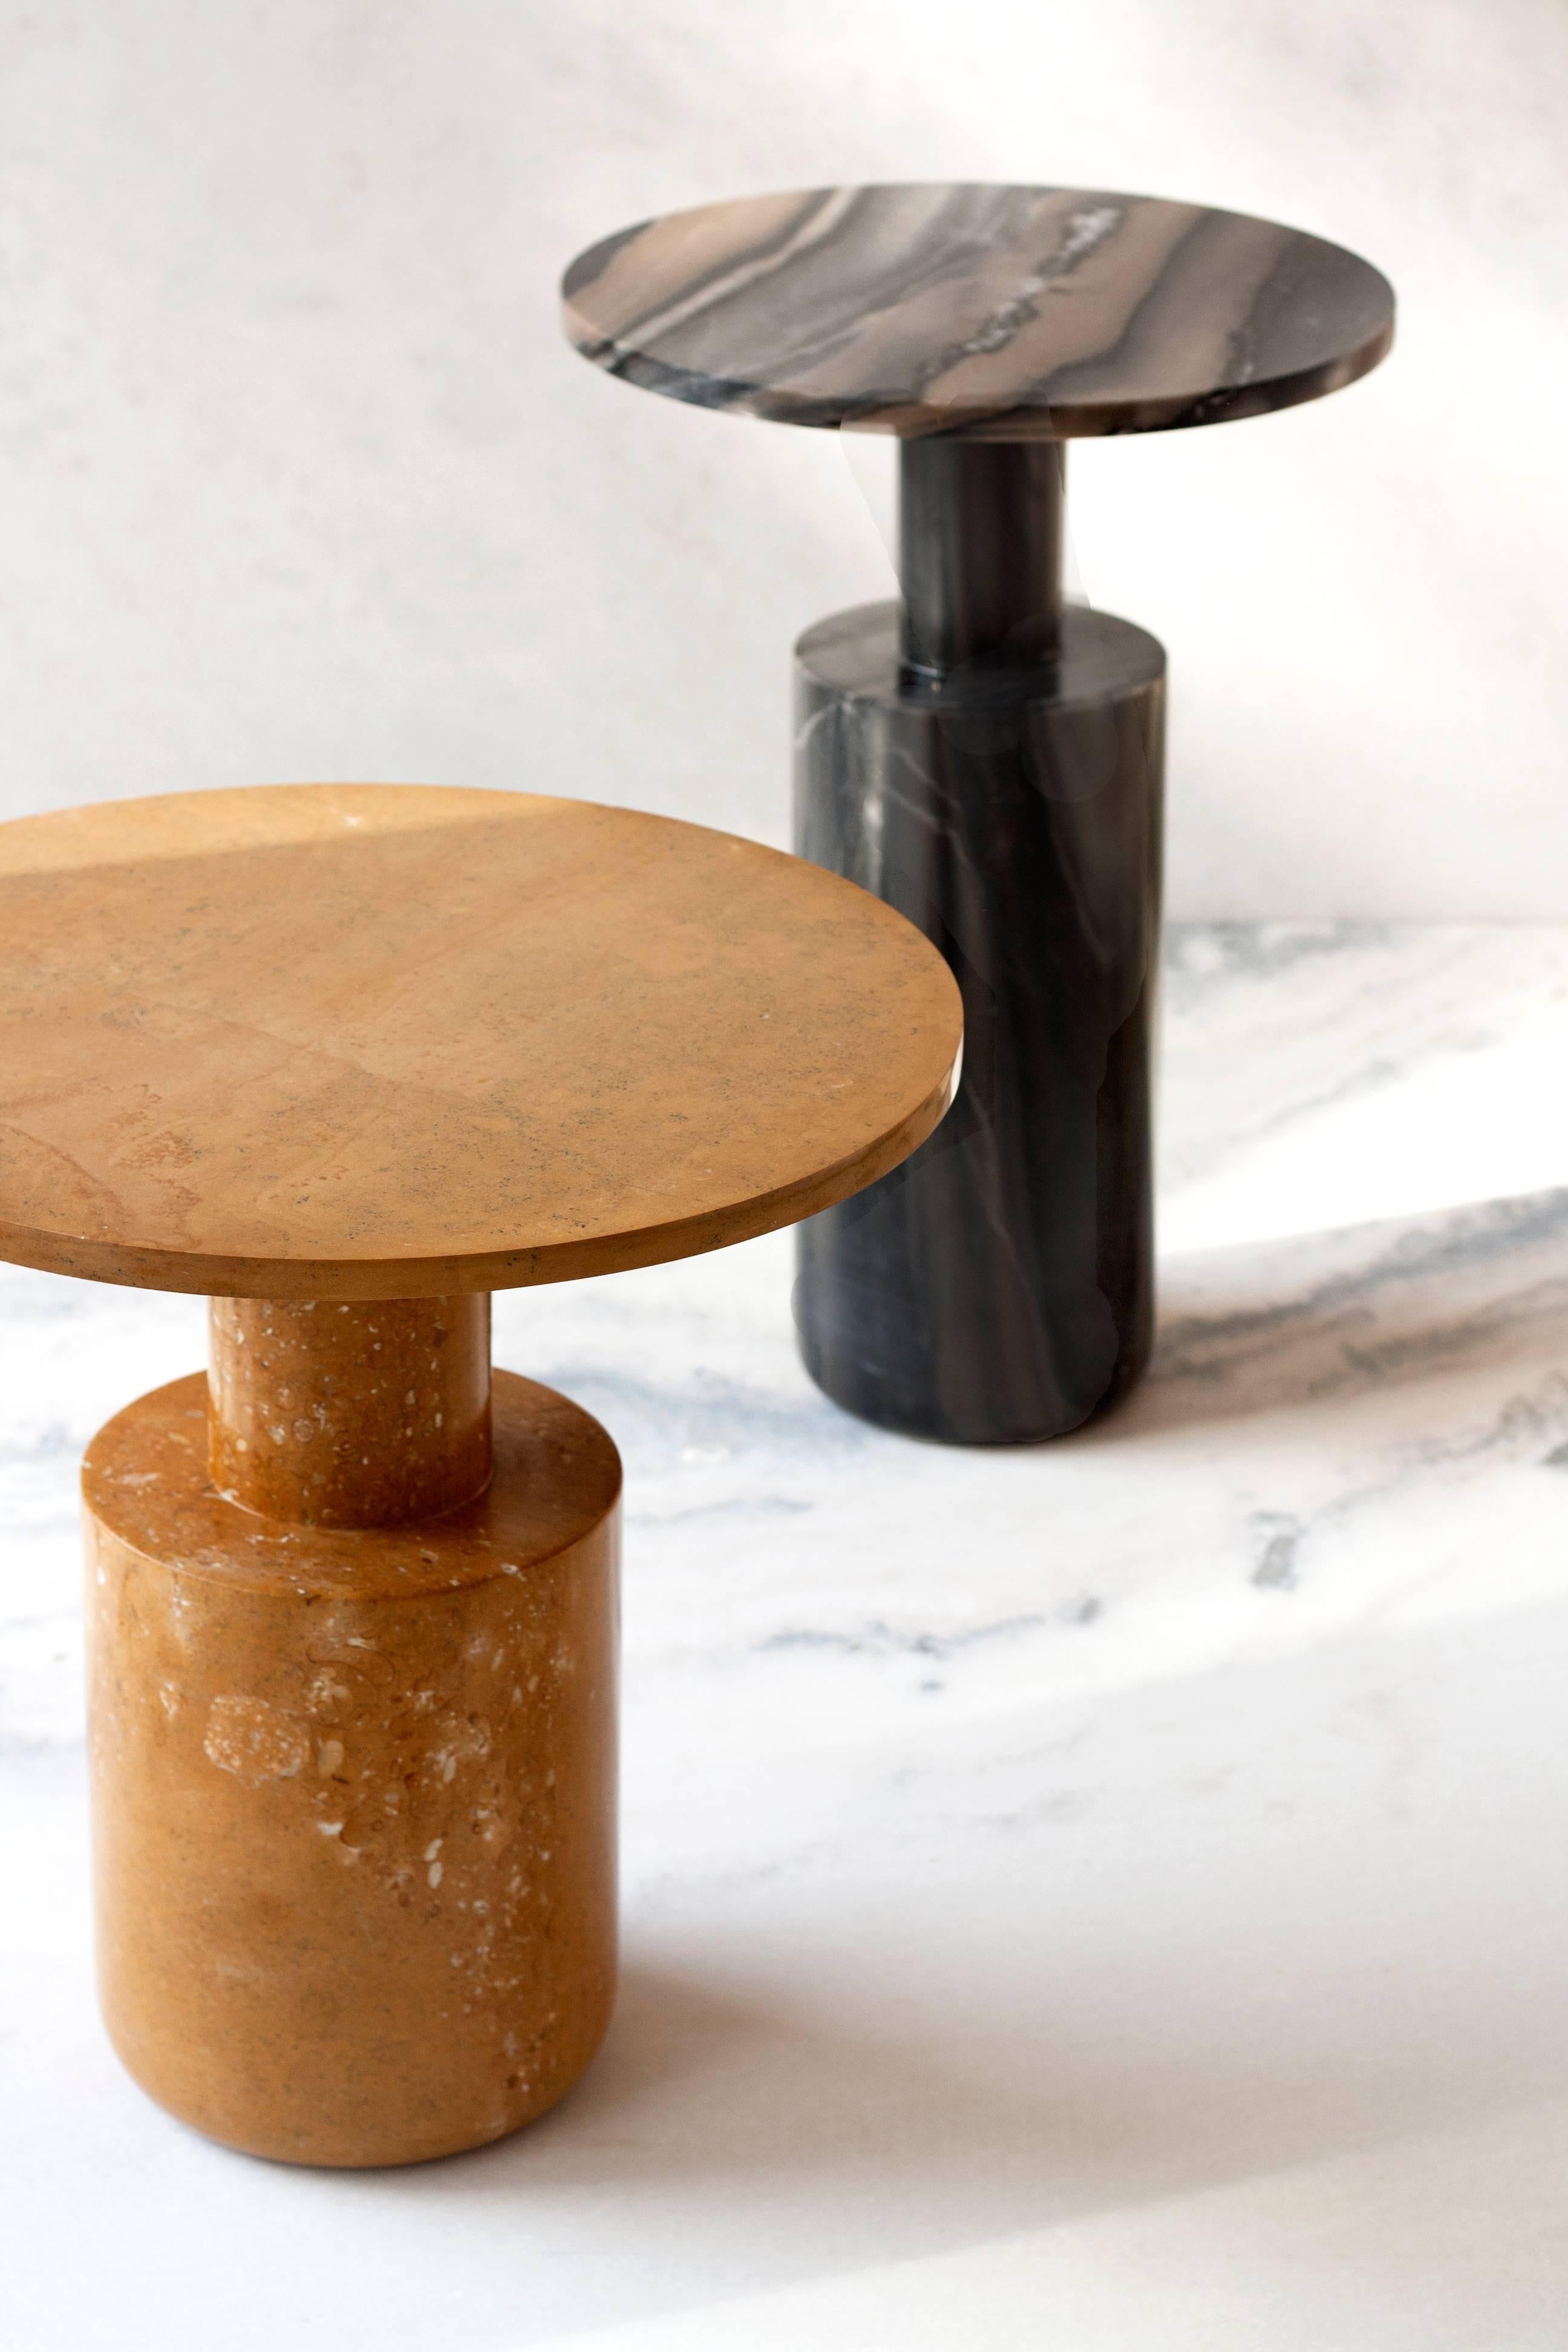 Dark plateau side table by raw material

Materials: Molten black marble

Limited Edition of 12.